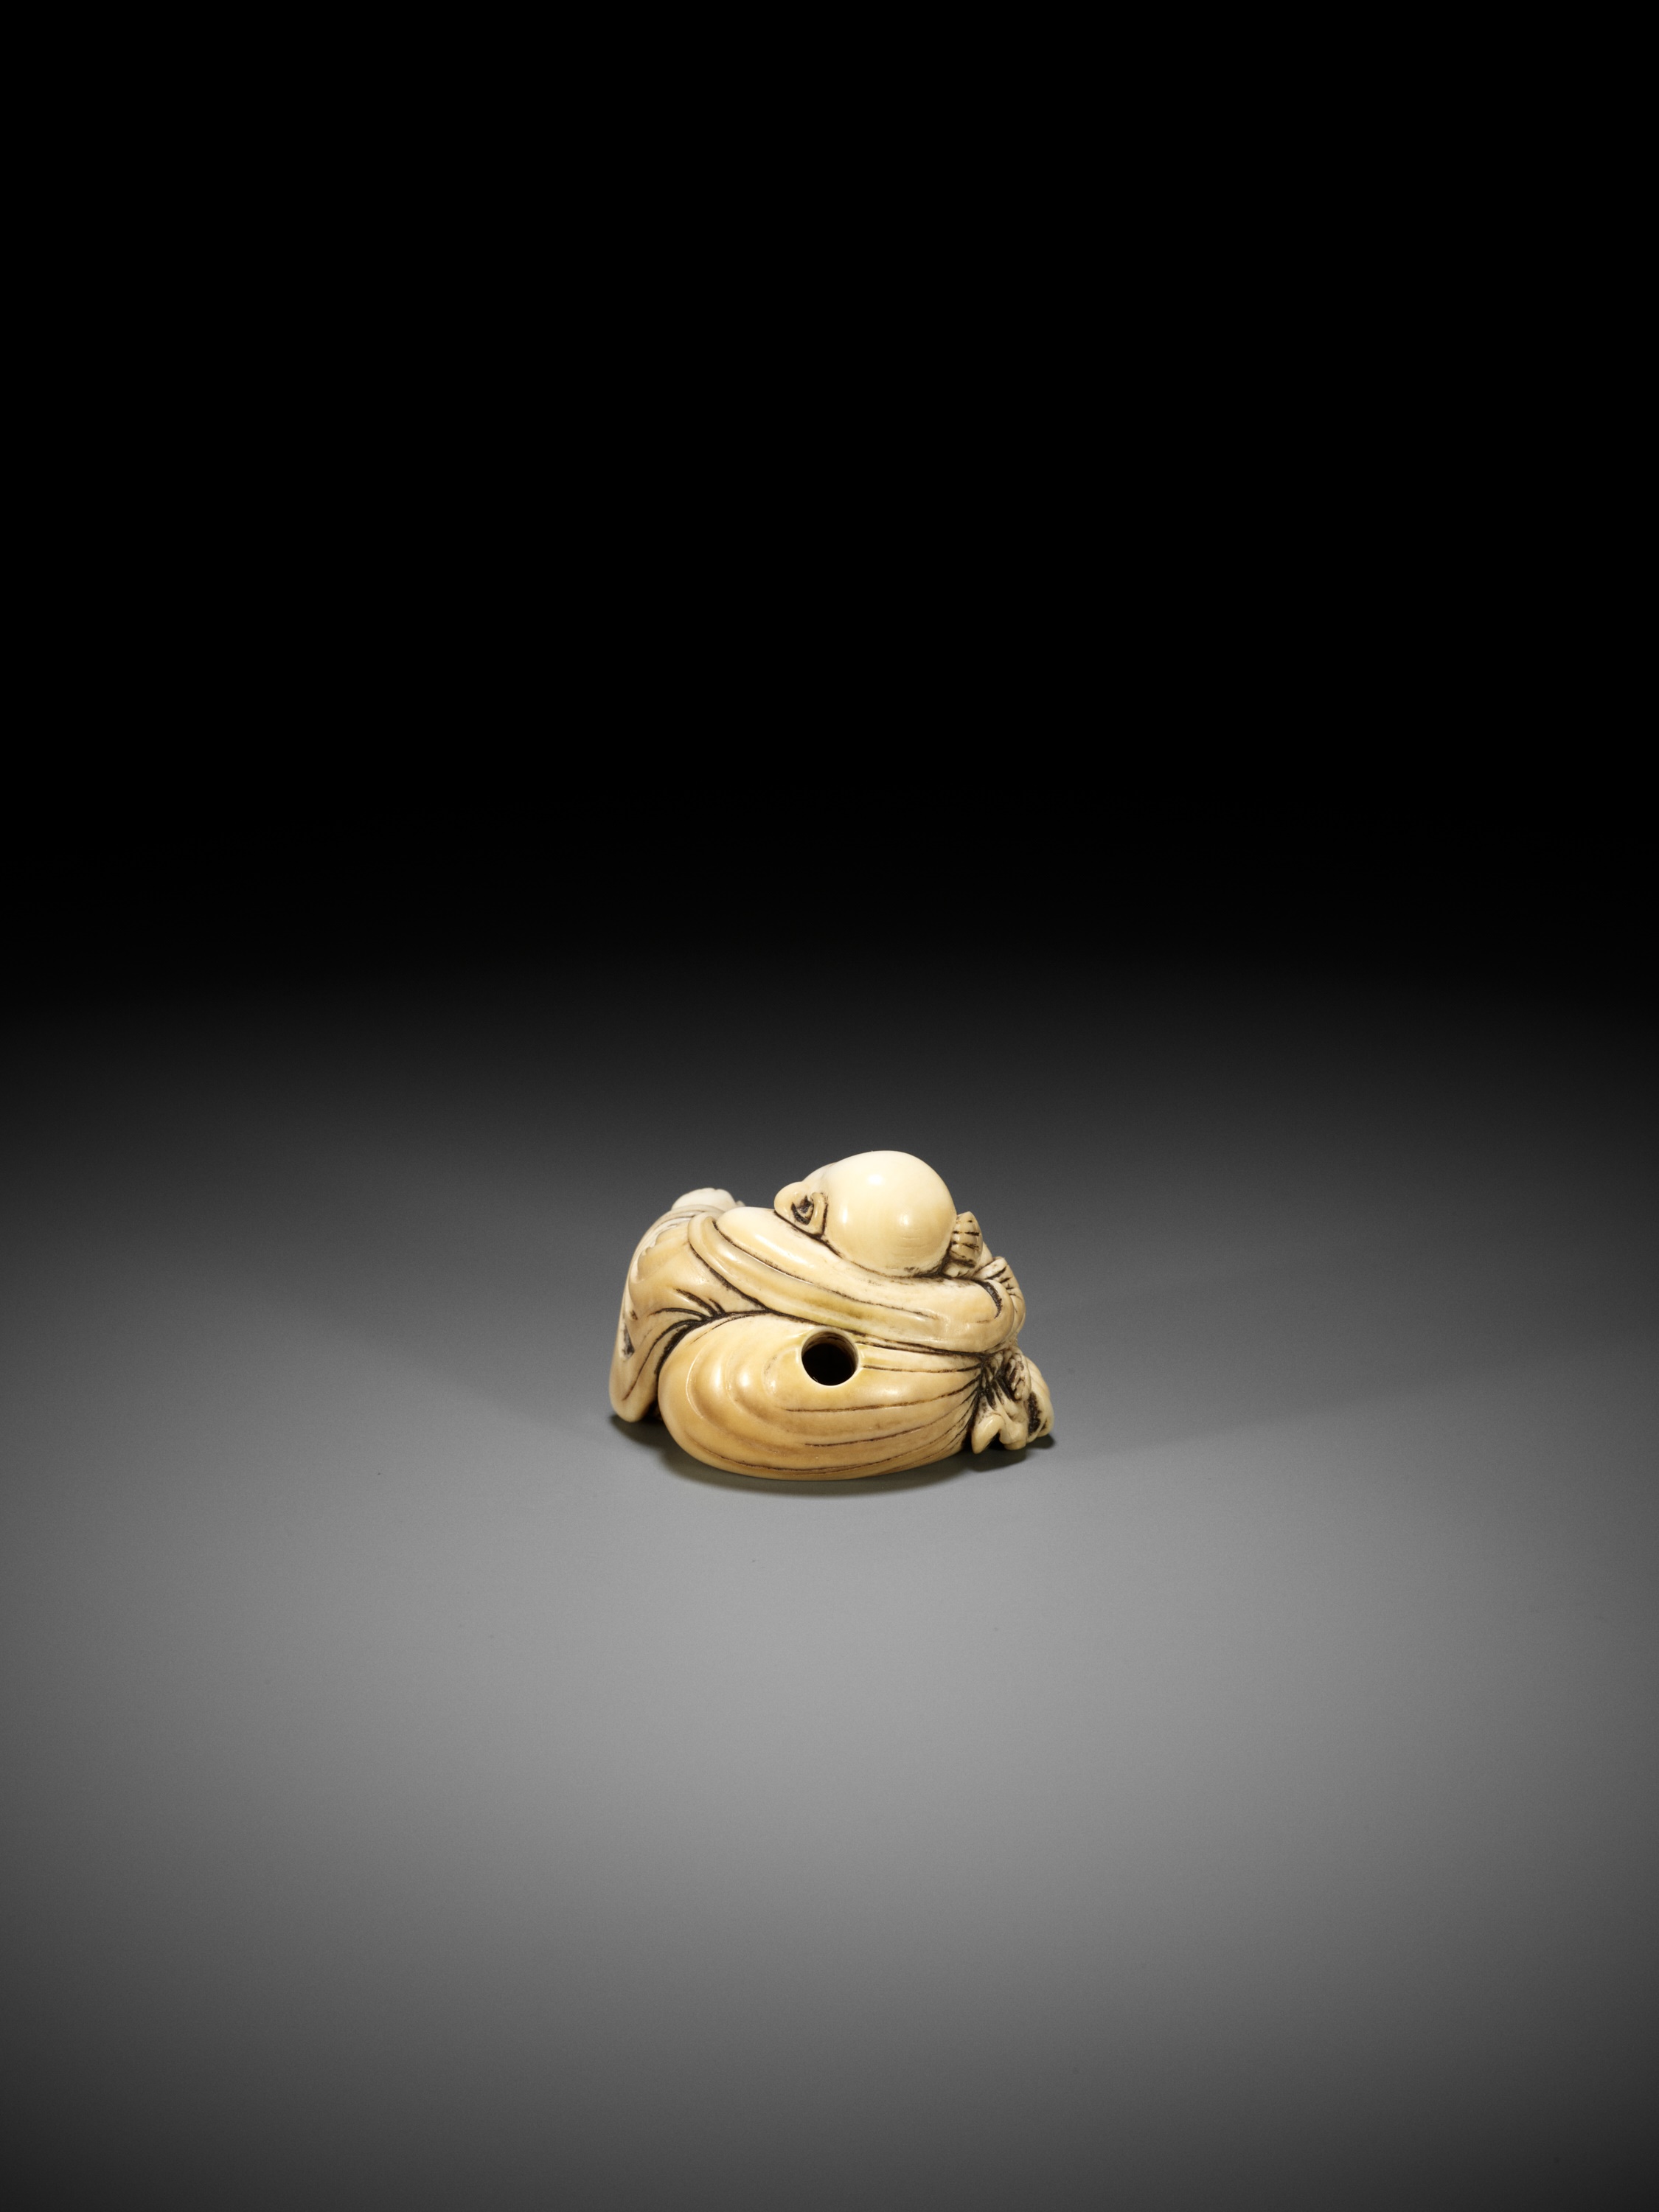 A CHARMING IVORY NETSUKE OF HOTEI WITH PUPPY - Image 11 of 12